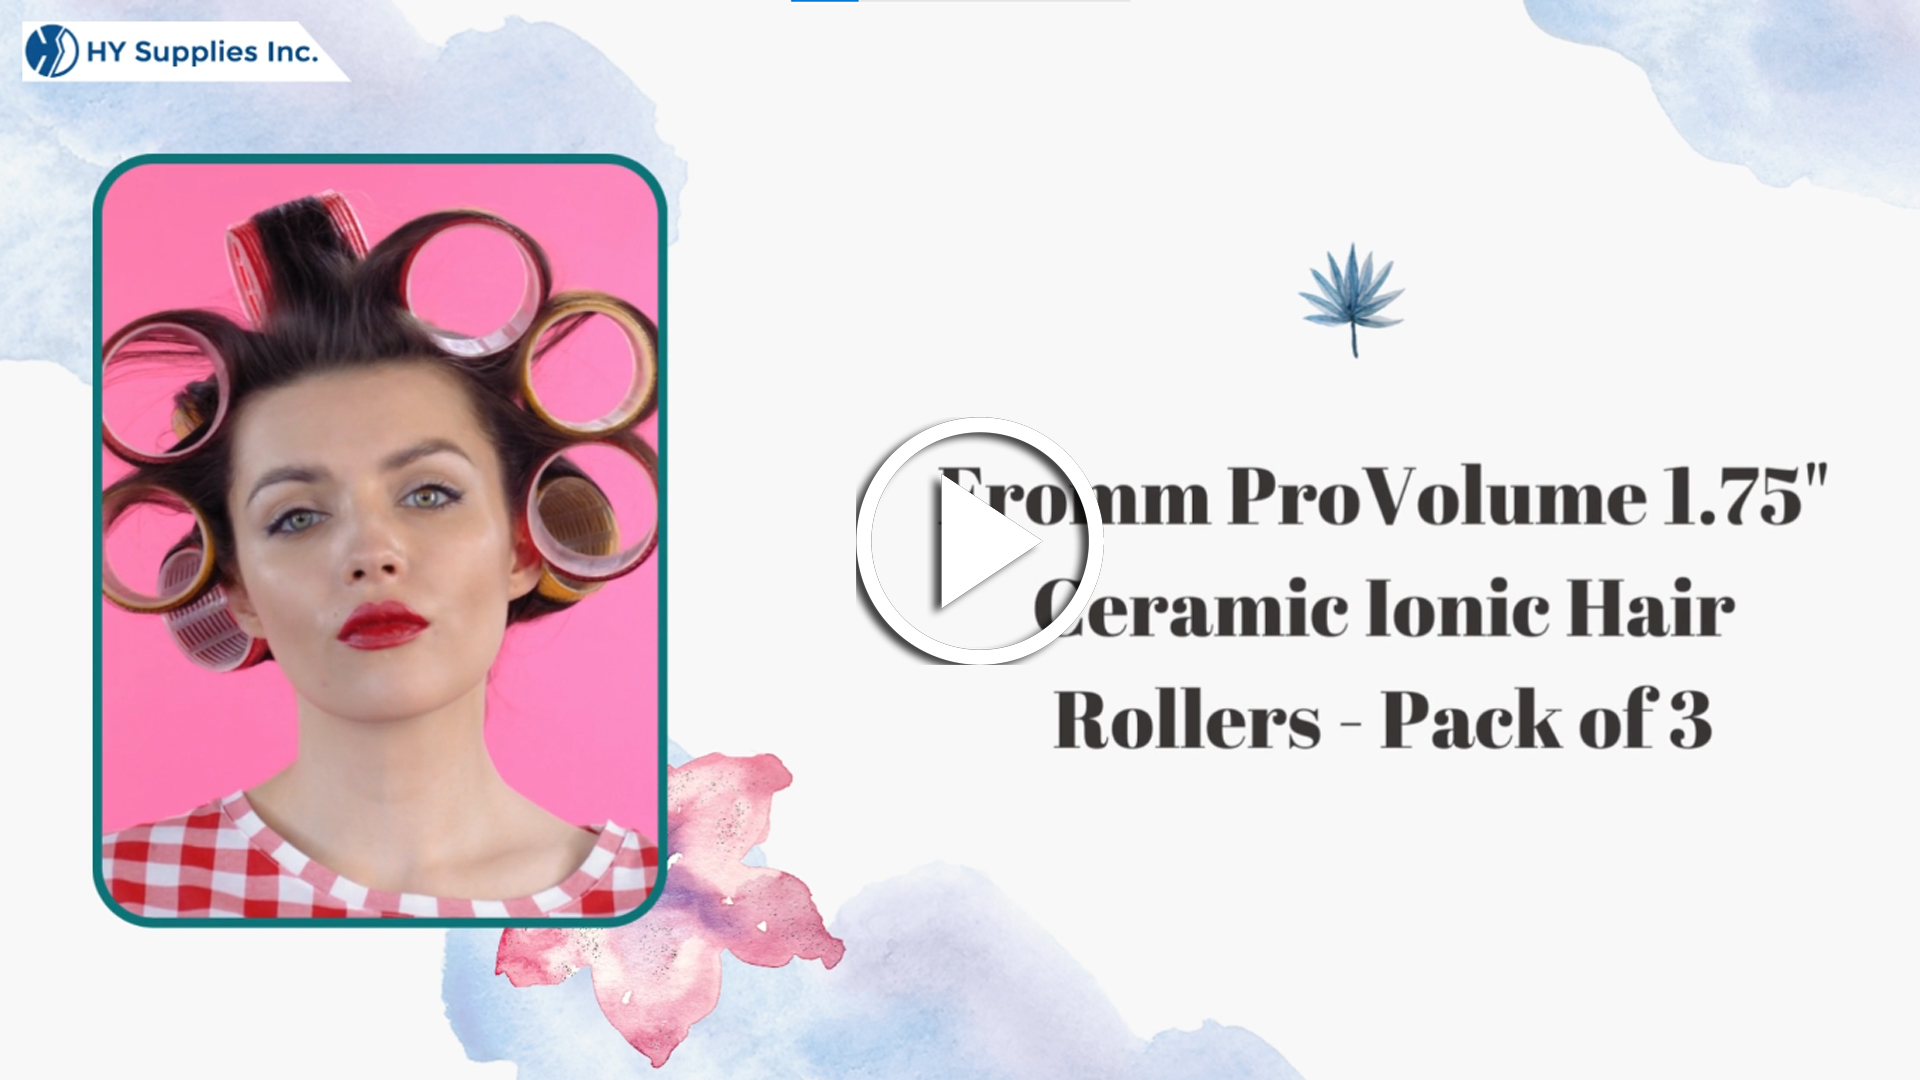 Fromm ProVolume 1.75" Ceramic Ionic Hair Rollers - Pack of 3